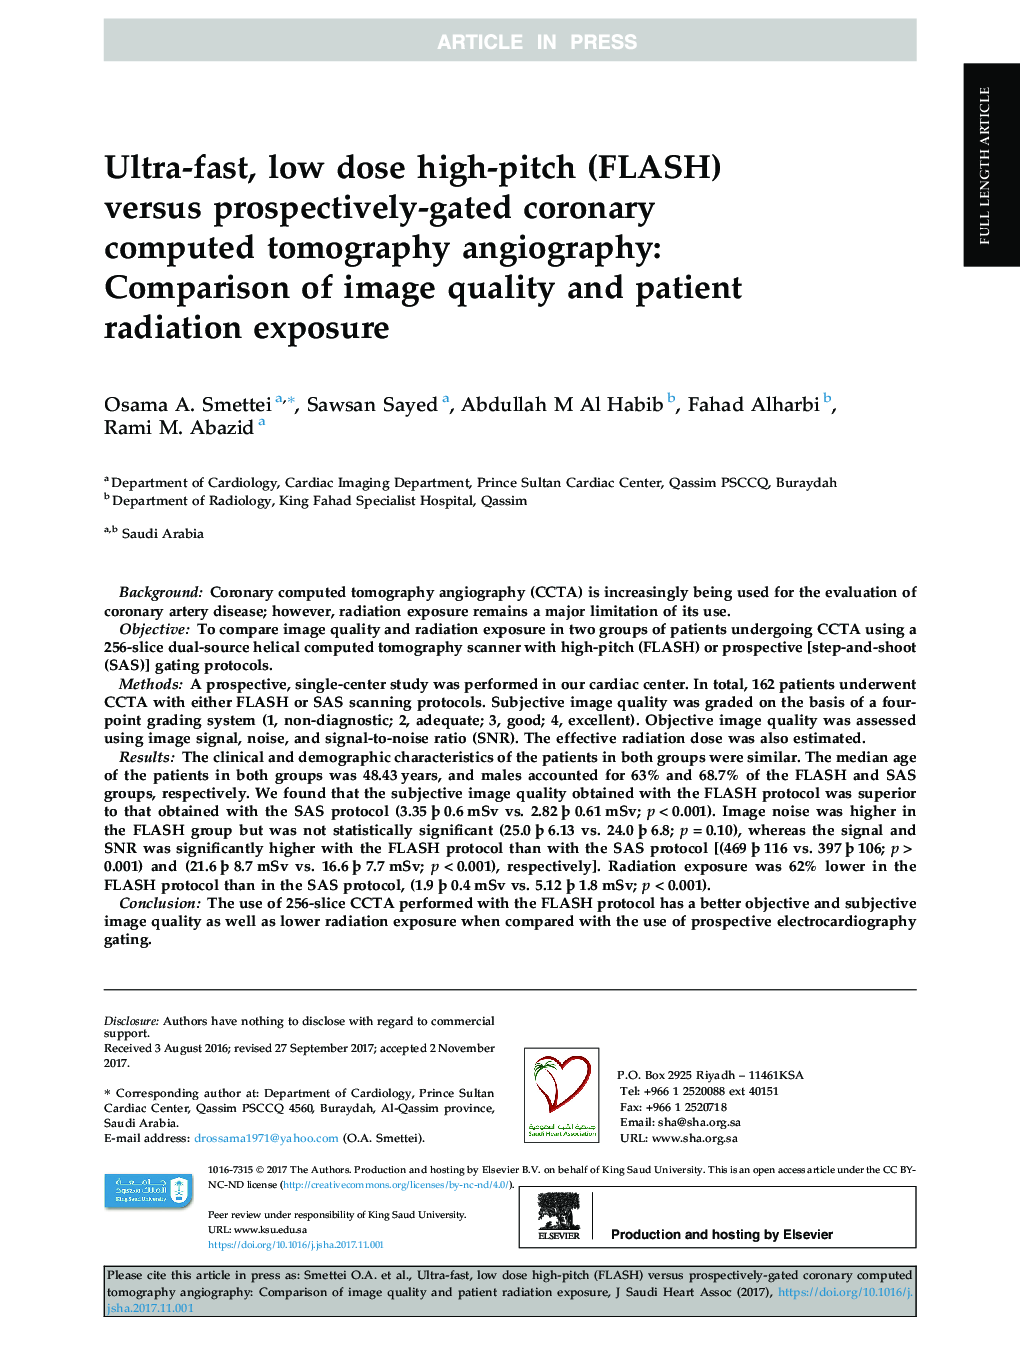 Ultra-fast, low dose high-pitch (FLASH) versus prospectively-gated coronary computed tomography angiography: Comparison of image quality and patient radiation exposure